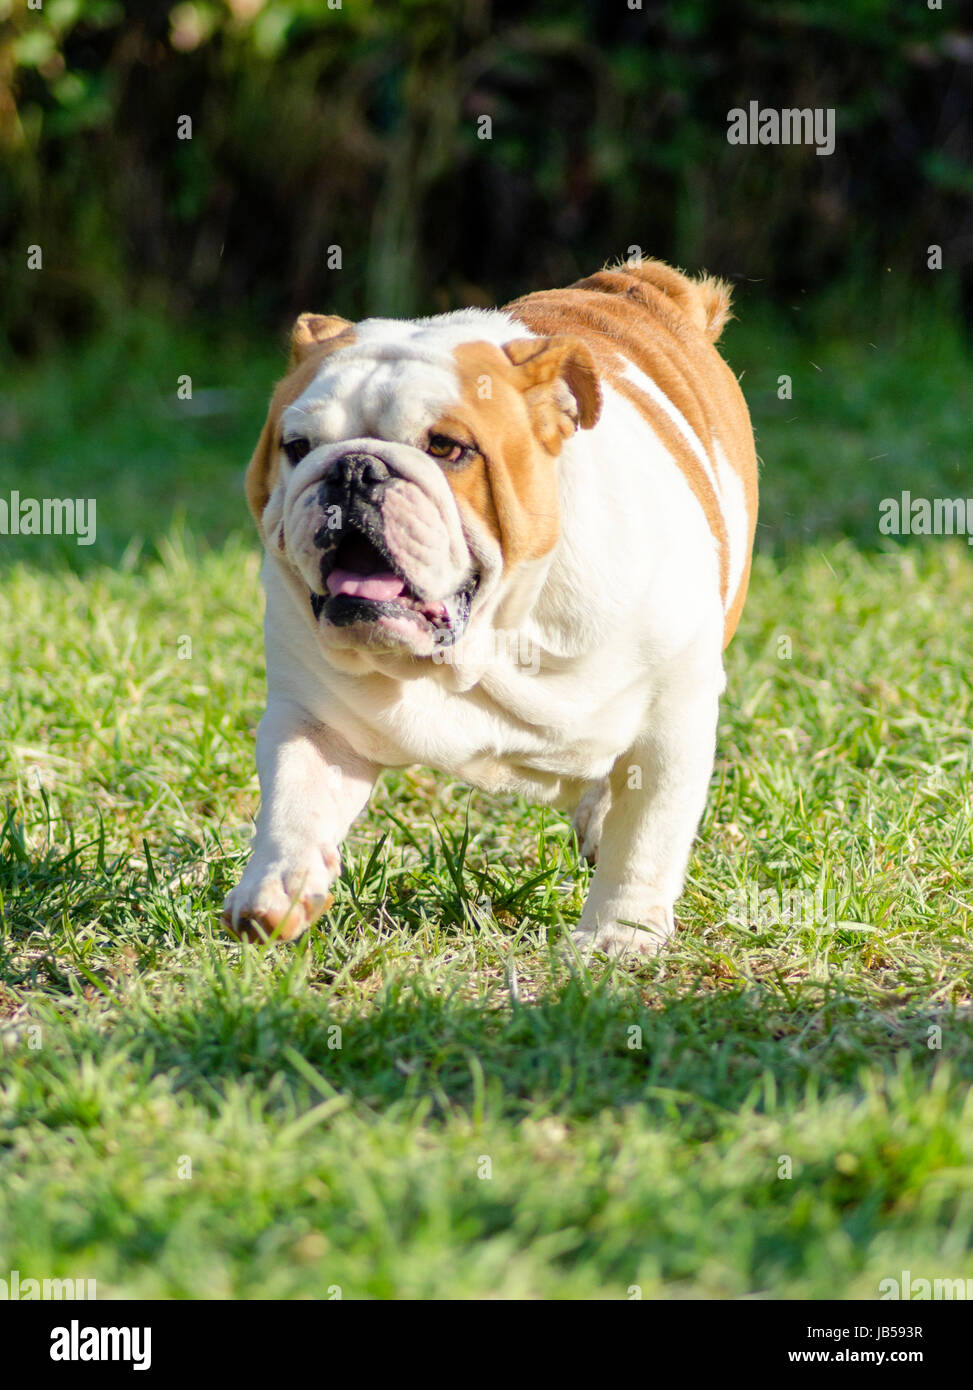 A small, young, beautiful, brown and white English Bulldog running on the lawn looking playful and cheerful. The Bulldog is a muscular, heavy dog with a wrinkled face and a distinctive pushed-in nose. Stock Photo